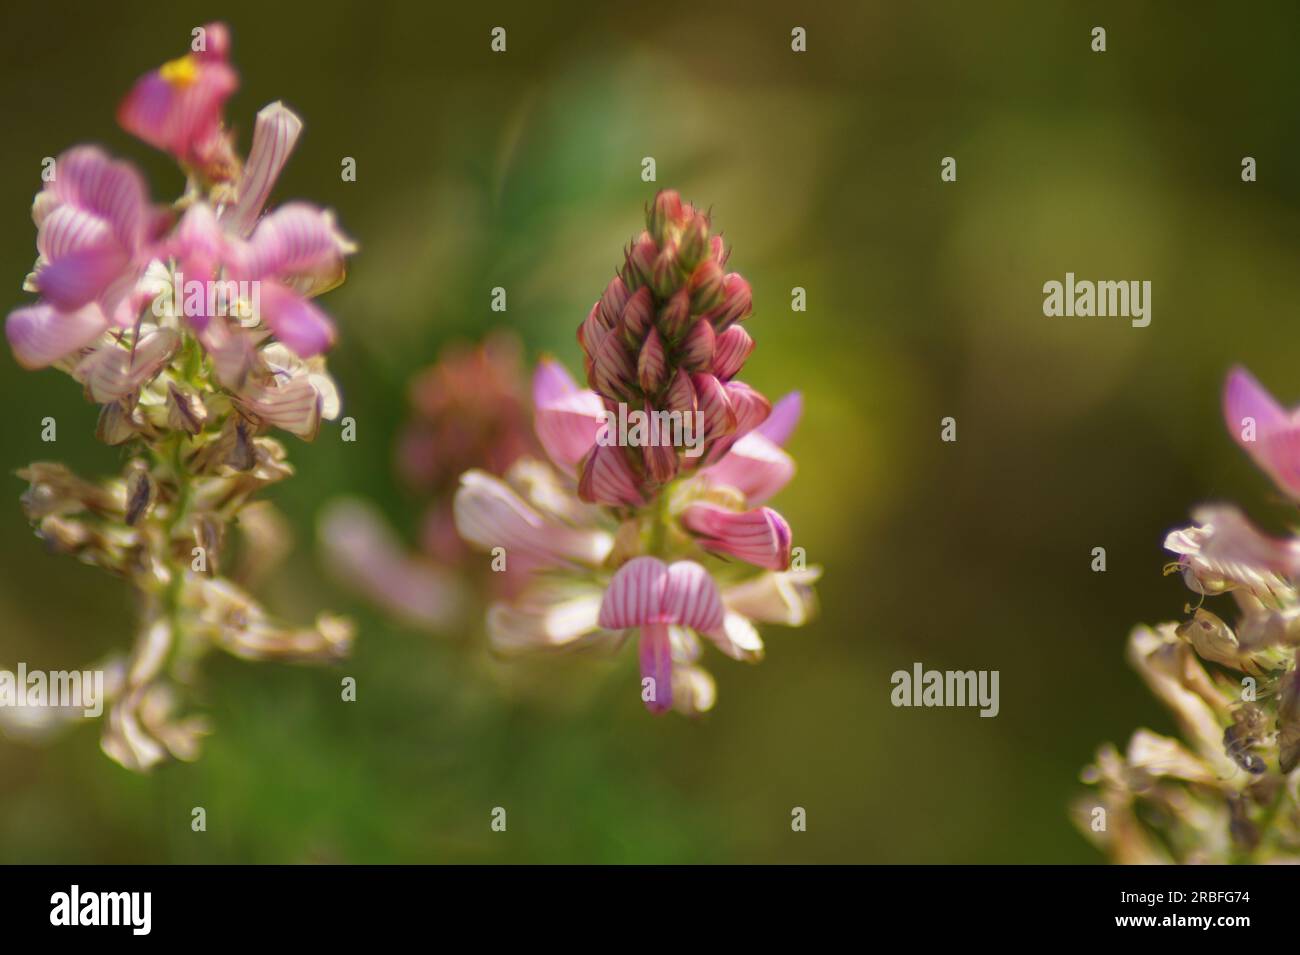 Close-up of the pink flower of the seed sparrow, Onobrychis viciifolia Stock Photo